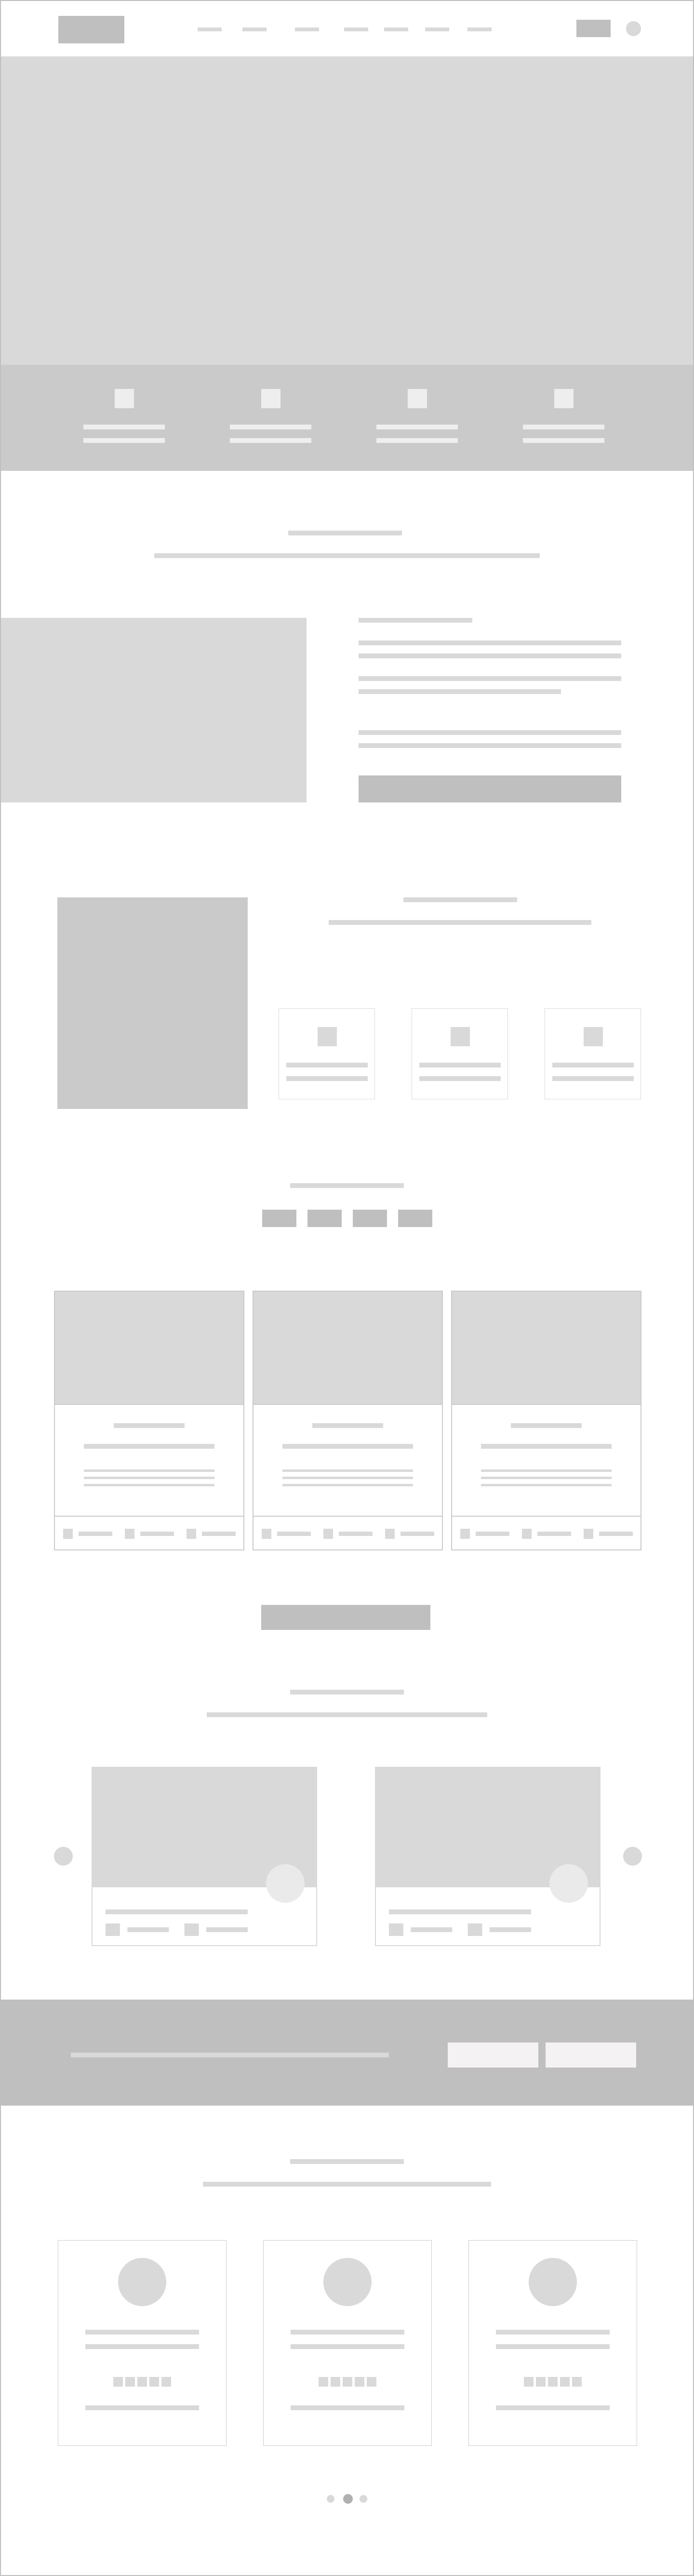 e learning wireframe